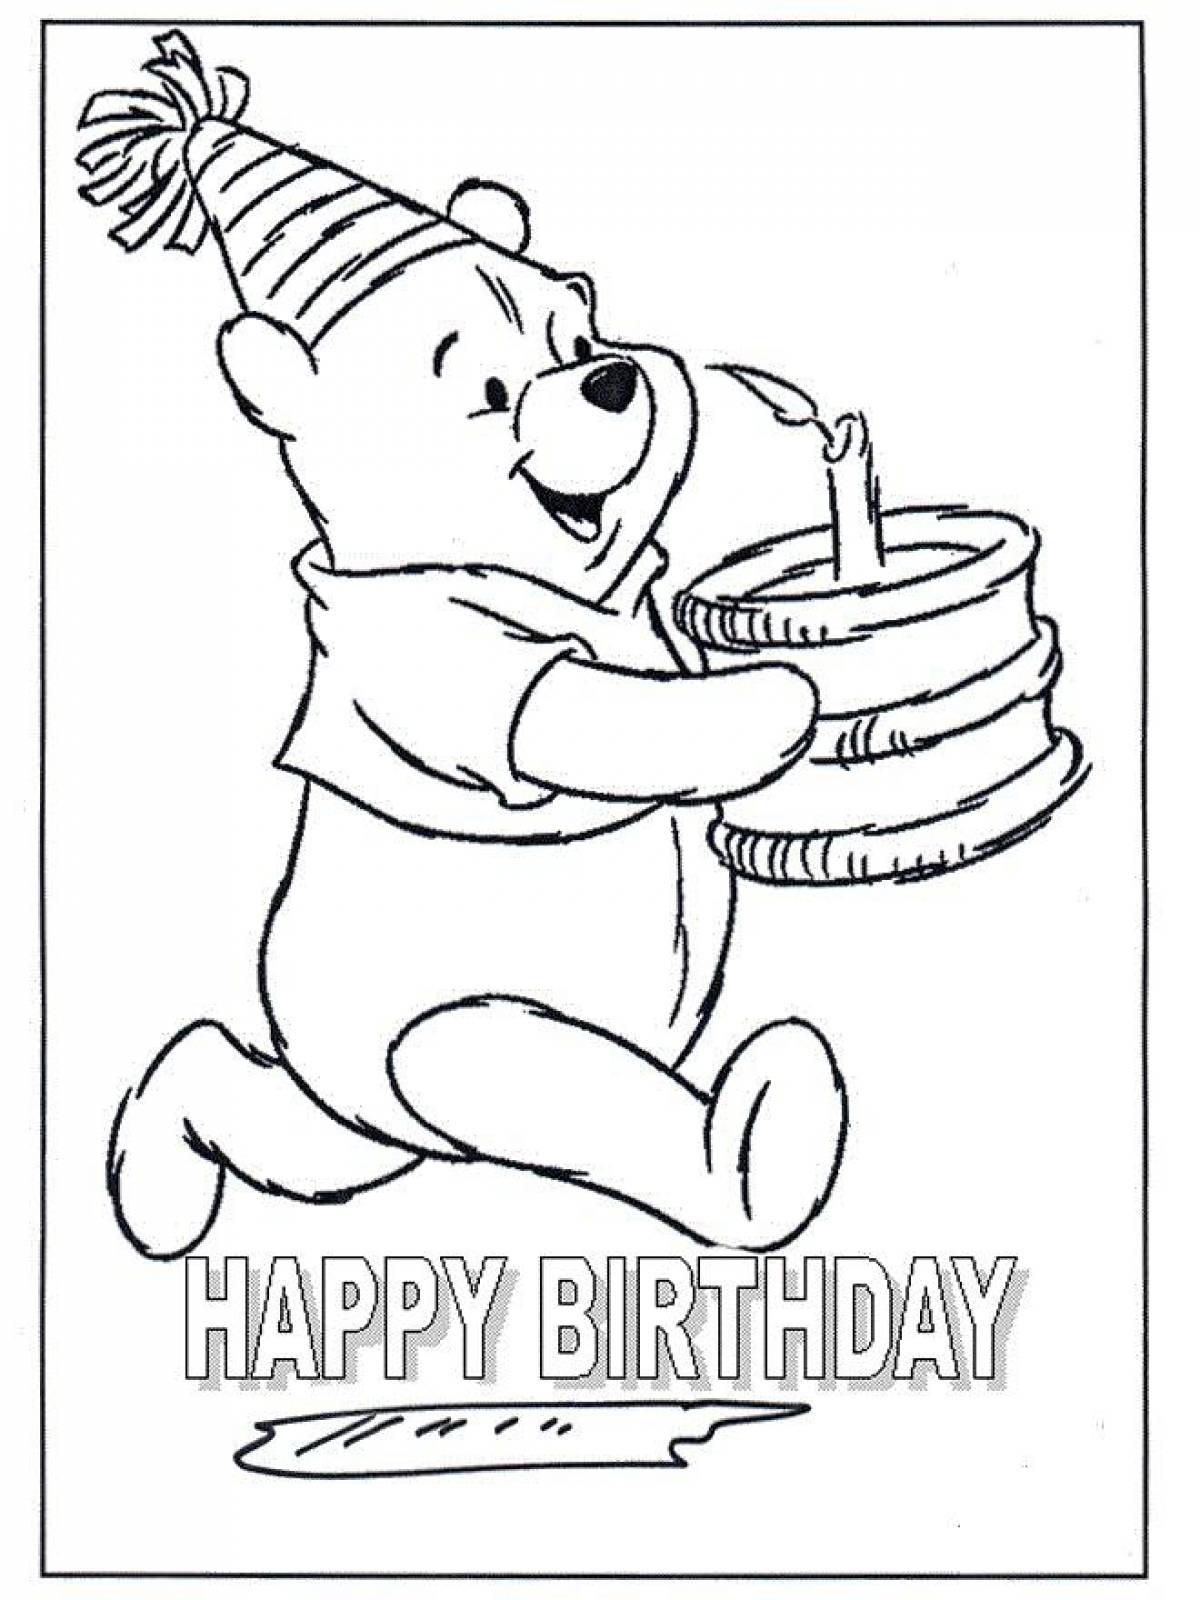 Winnie the pooh with cake